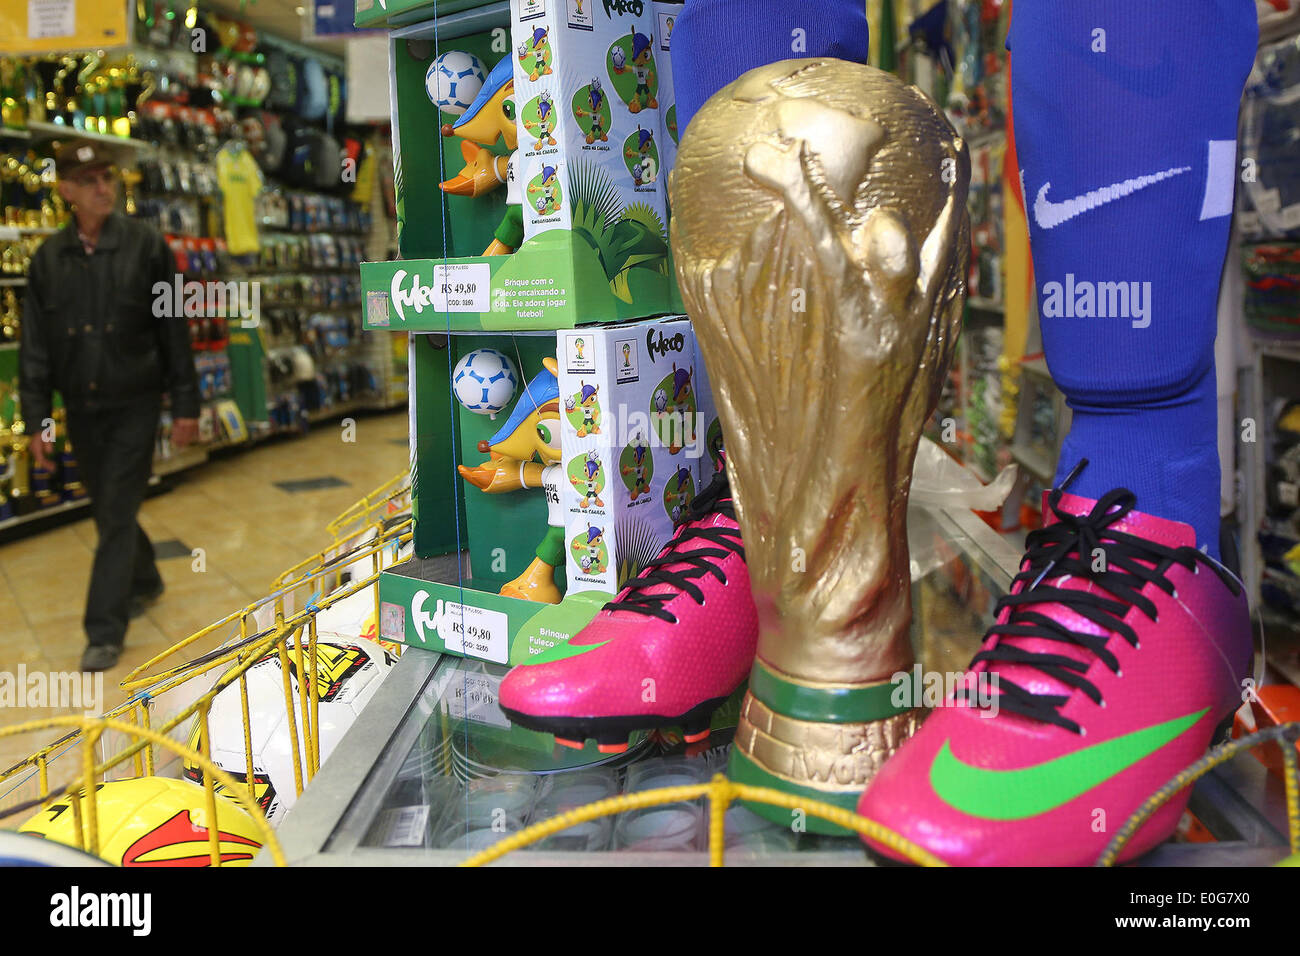 Sao Paulo, Sao Paulo in Brazil. 12th May, 2014. Figures of Fuleco, the official FIFA World Cup mascot, are displayed in a store in Sao Paulo in Brazil, on May 12, 2014. Sao Paulo will host the opening game of FIFA World Cup when Brazil faces Croatia on June 12. © Rahel Patrasso/Xinhua/Alamy Live News Stock Photo